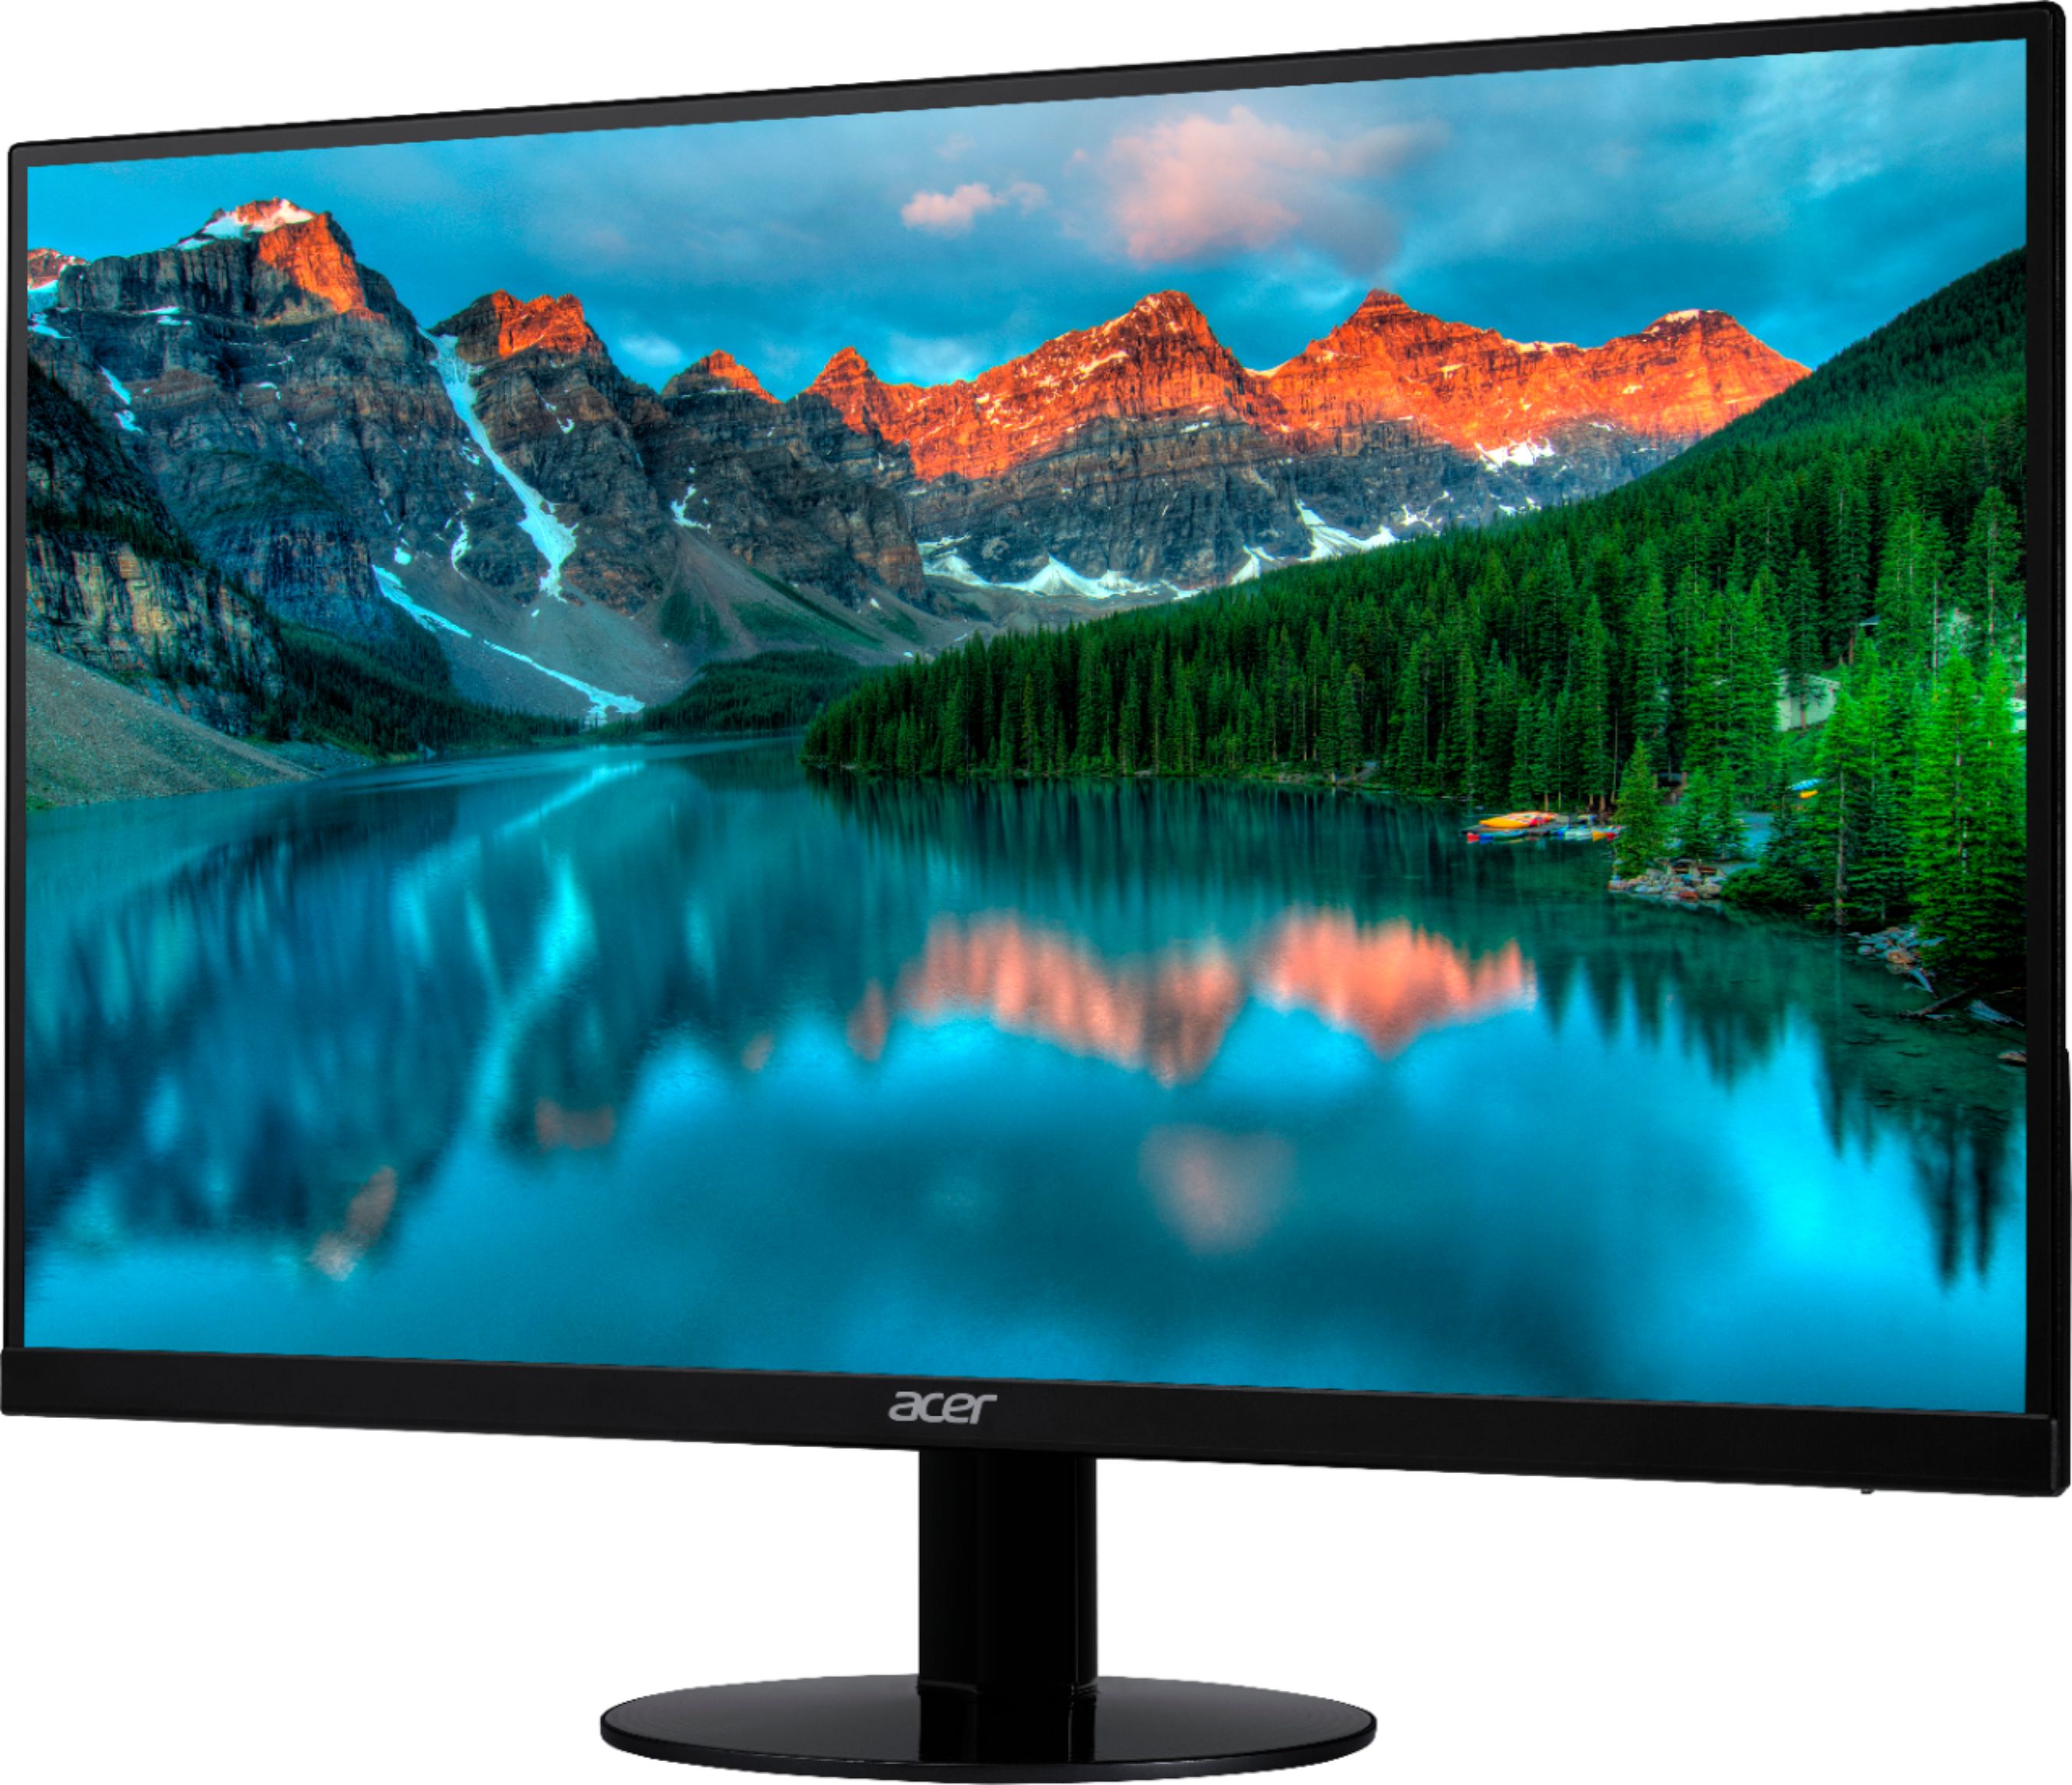 Left View: Acer - Geek Squad Certified Refurbished SA230 23" IPS LED FHD Monitor - Black